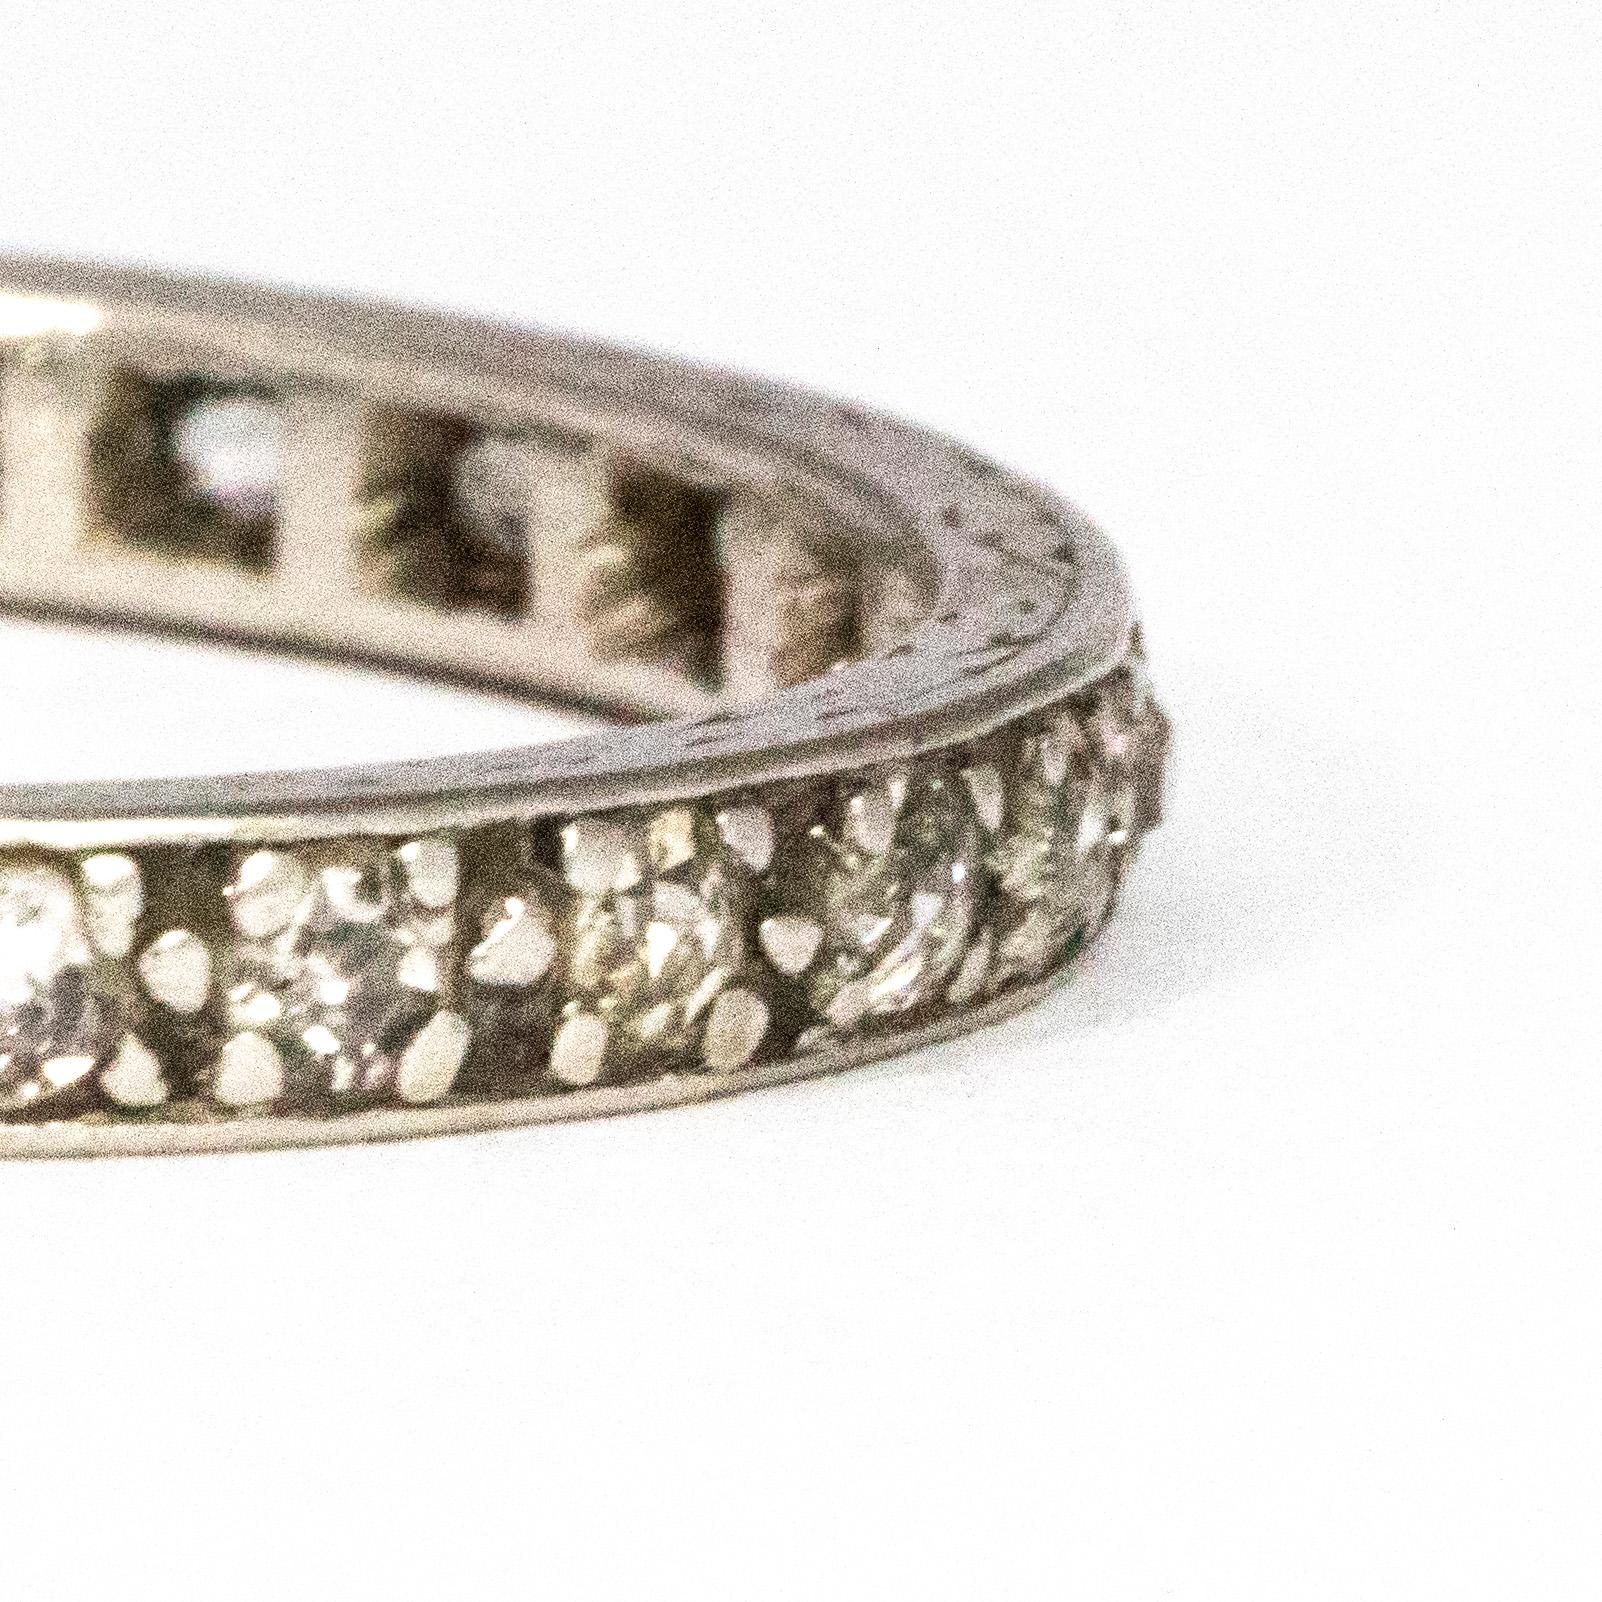 Each sparkling diamond measures 3pts each and are set flush into the eternity band. The ring has a delicate feel and a wonderful shimmer.

Ring Size: N or 6 3/4
Band Width: 2mm